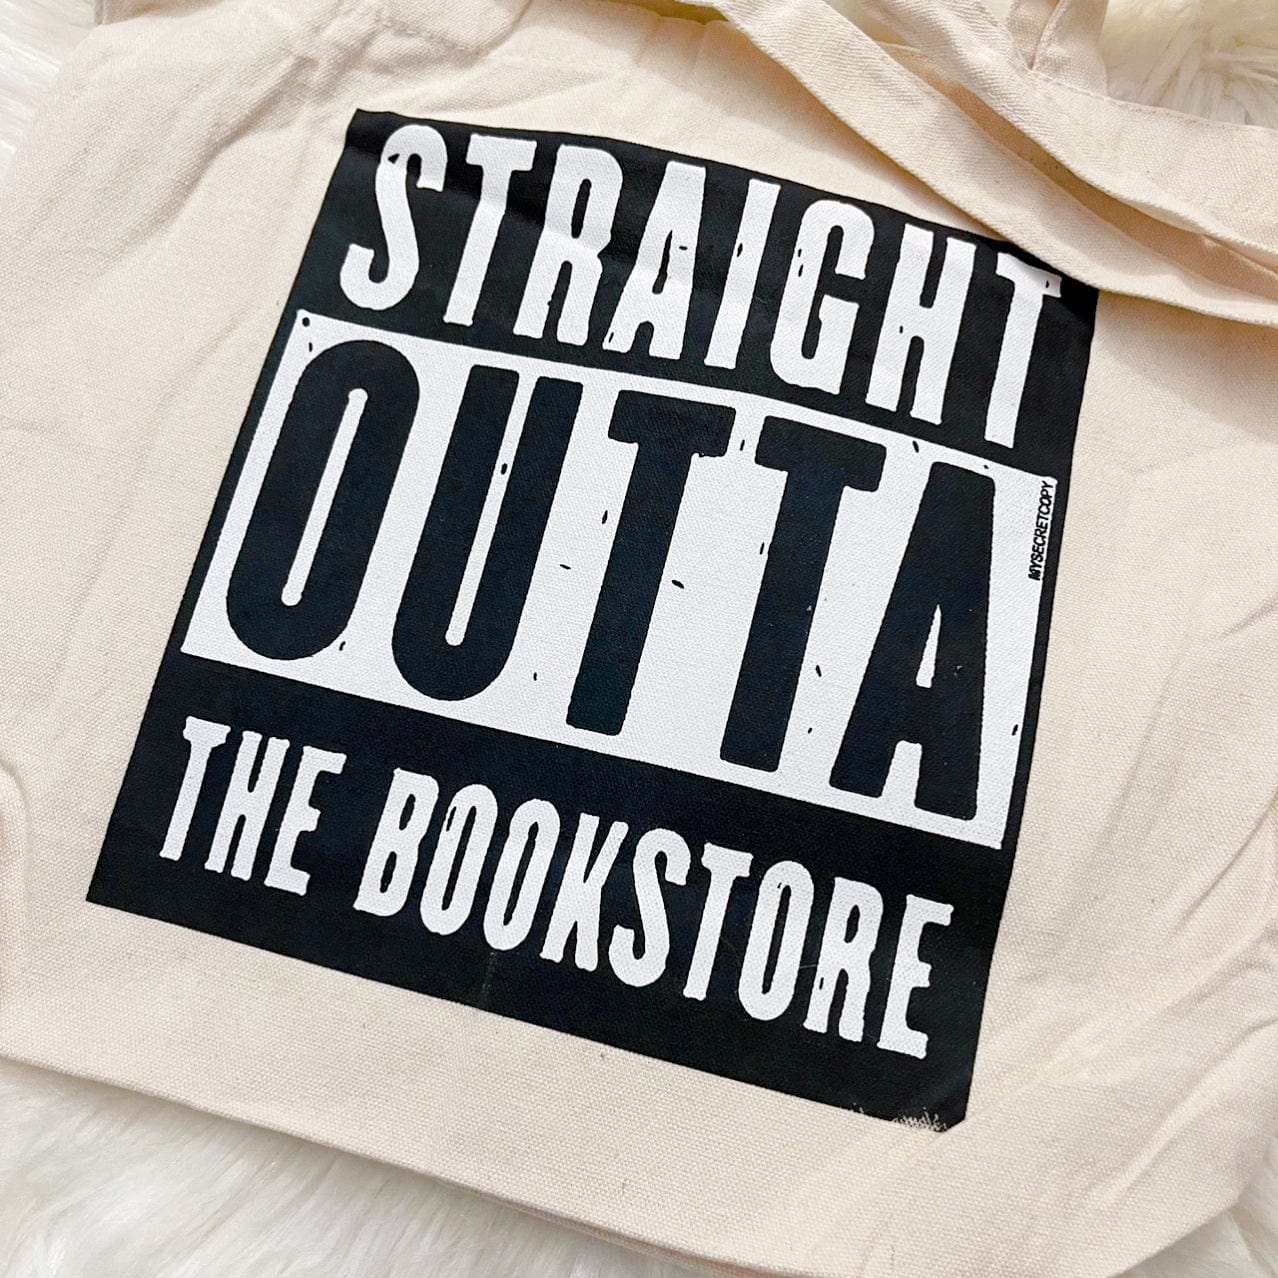 Out of the Bookstore Tote Bag